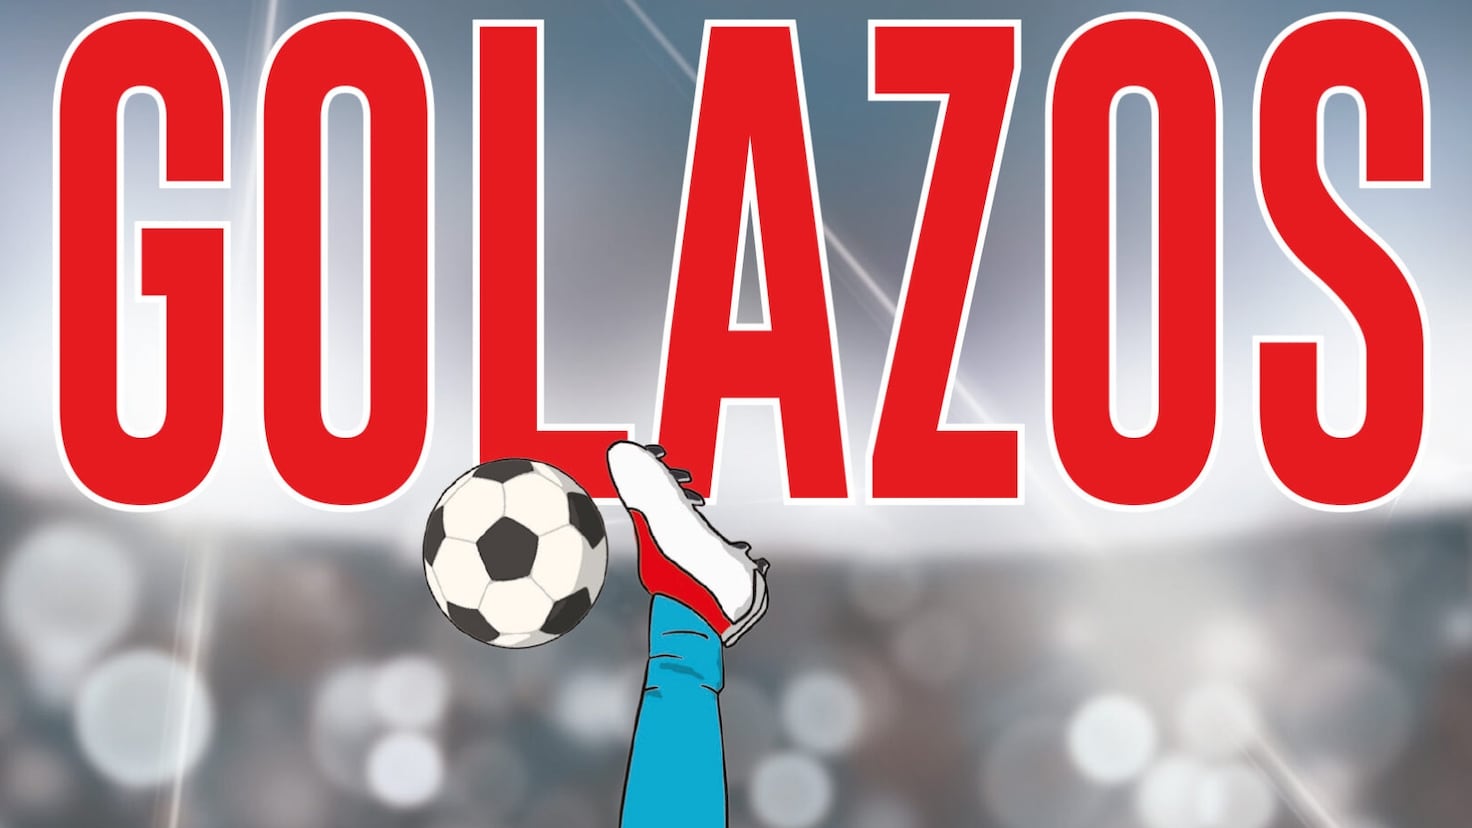 Reliving Football's Most Iconic Goals: Javier Serrano's 'Golazos' Lights Up Youth Imagination